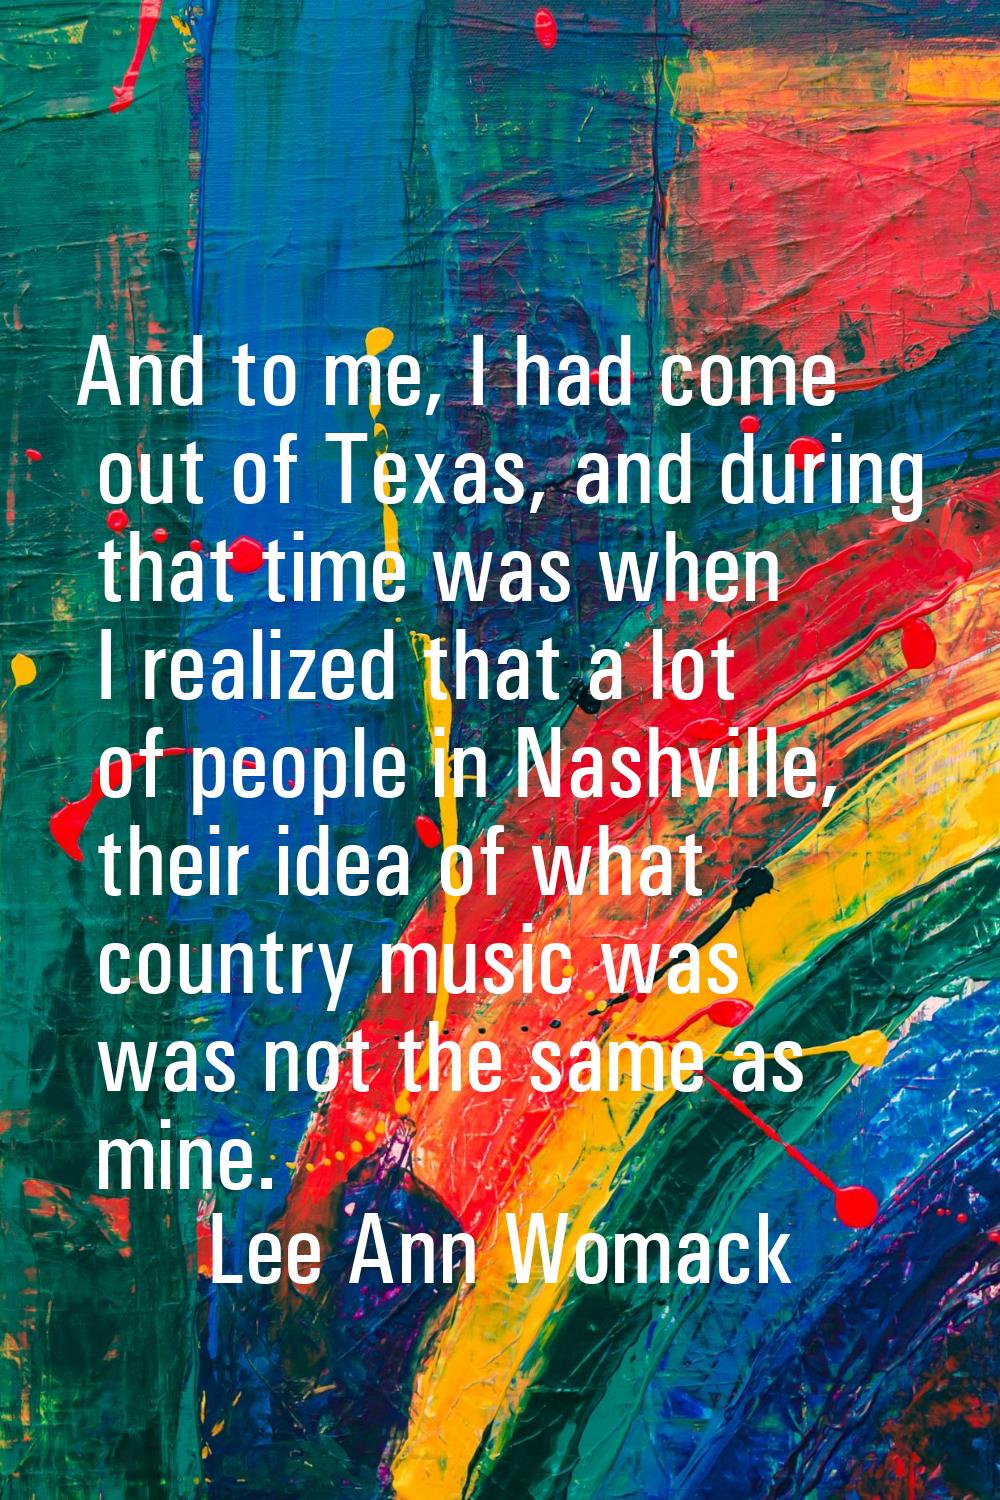 And to me, I had come out of Texas, and during that time was when I realized that a lot of people i